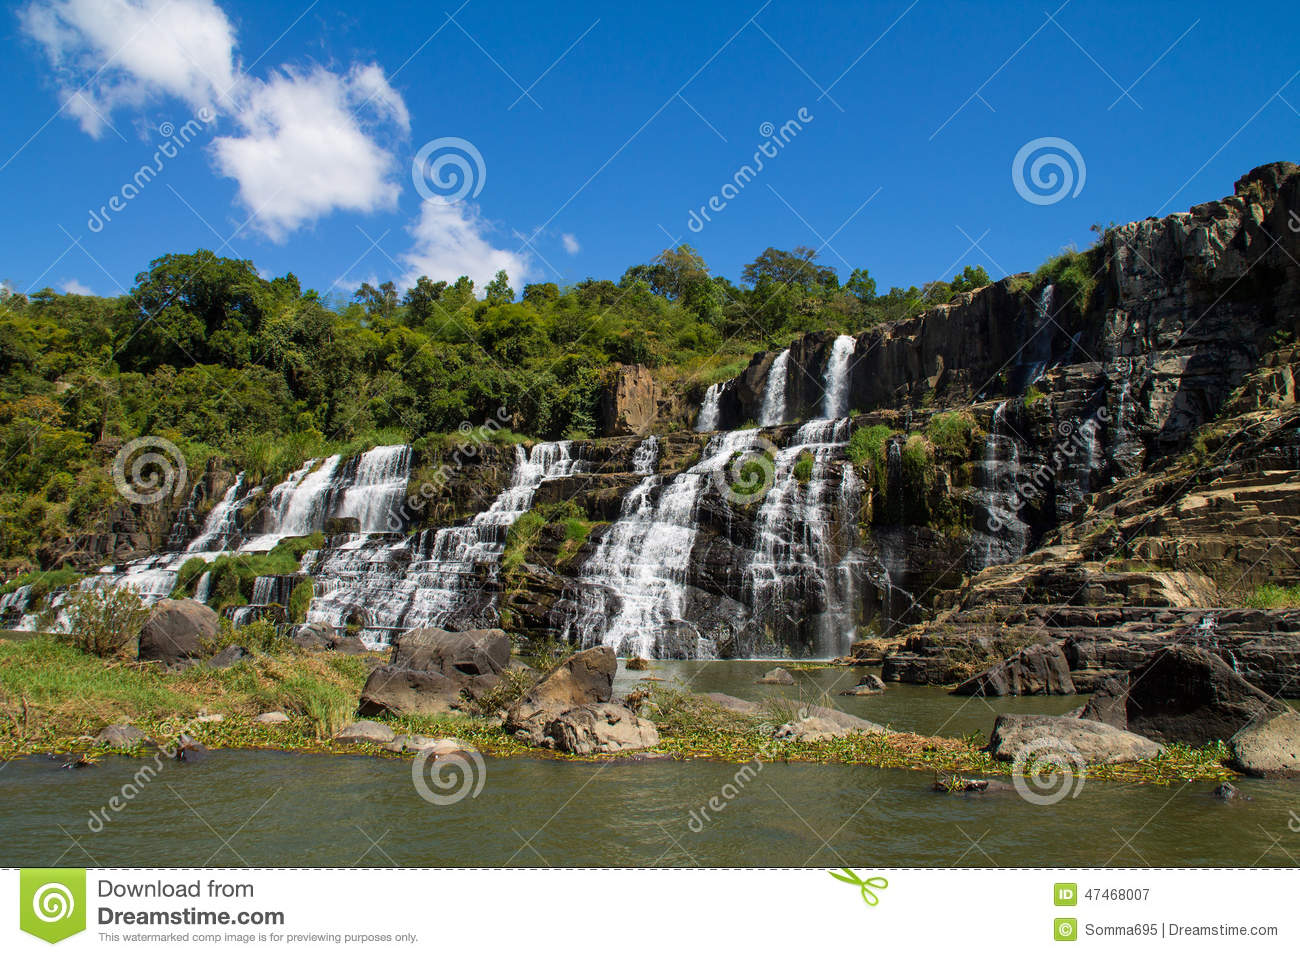 Pongour Waterfall clipart #11, Download drawings